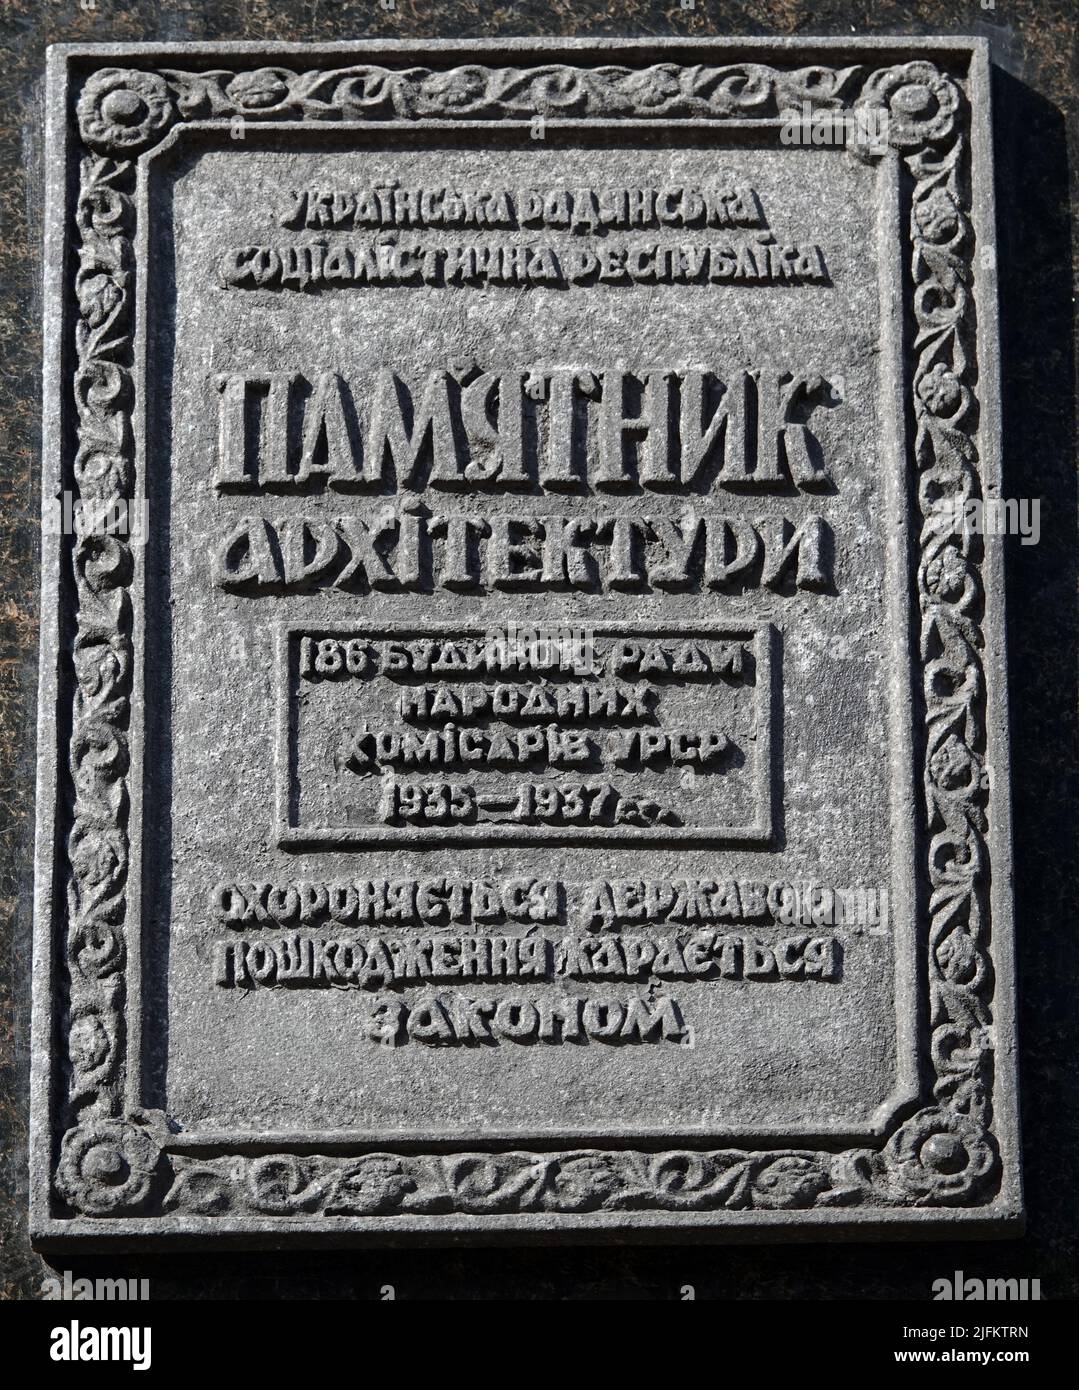 Kiev, Ukraine June 10, 2021: Plaque is an architectural monument on the facade of the building of the Council of People's Commissars of the Ukrainian Stock Photo